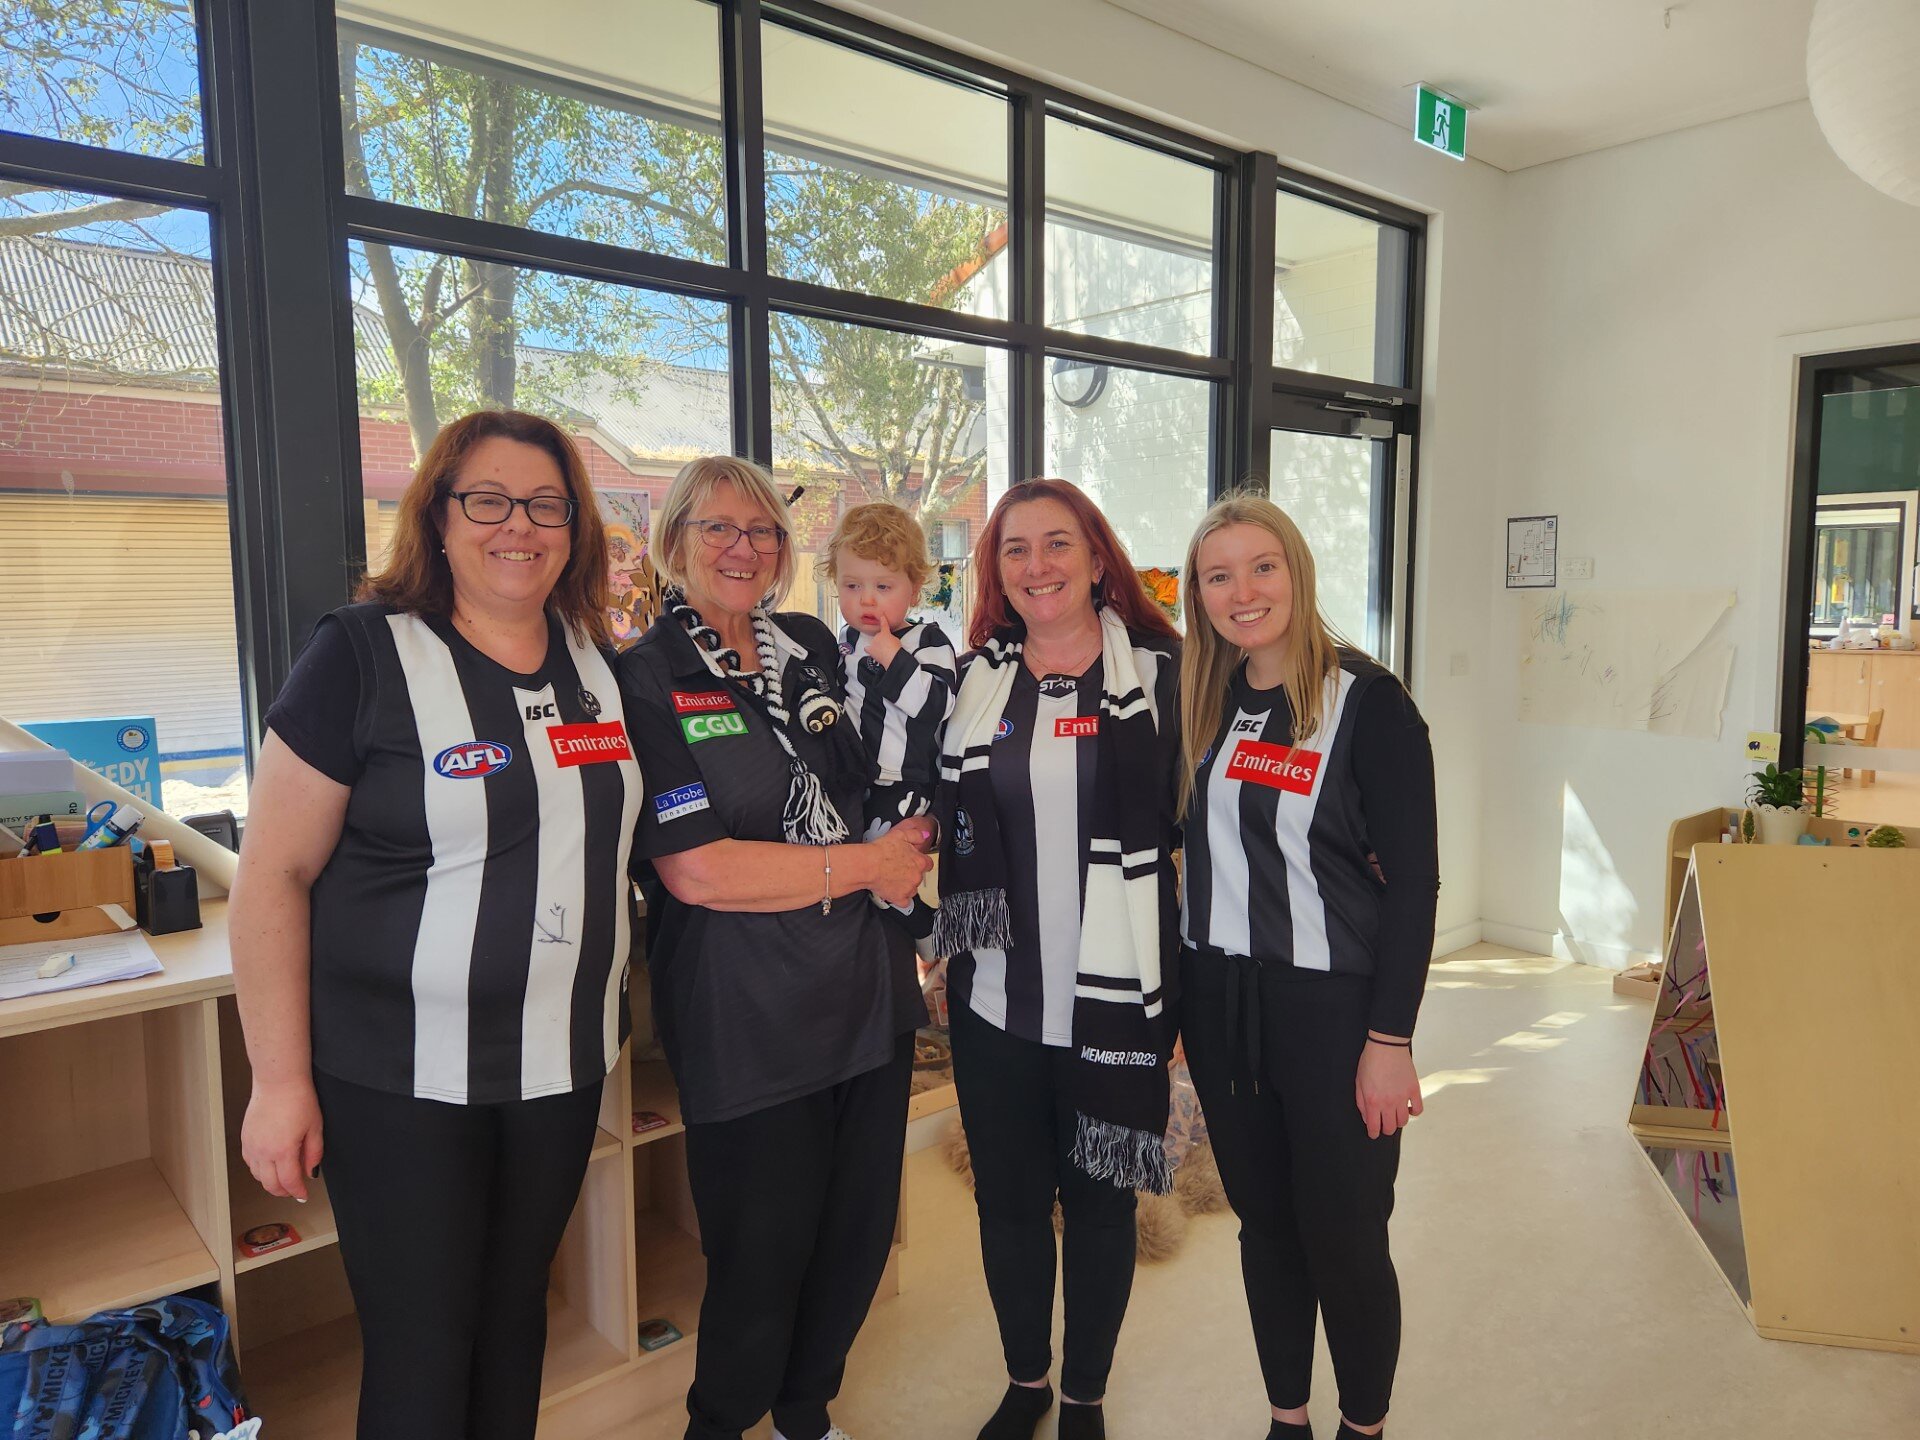 This week at Hei Schools Ballarat Central we are celebrating the upcoming AFL Grand Final, wearing our favourite footy team colours.  Thursday we will be having an exciting day of games and footy food to enjoy before the long weekend.
 #collingwoodfc